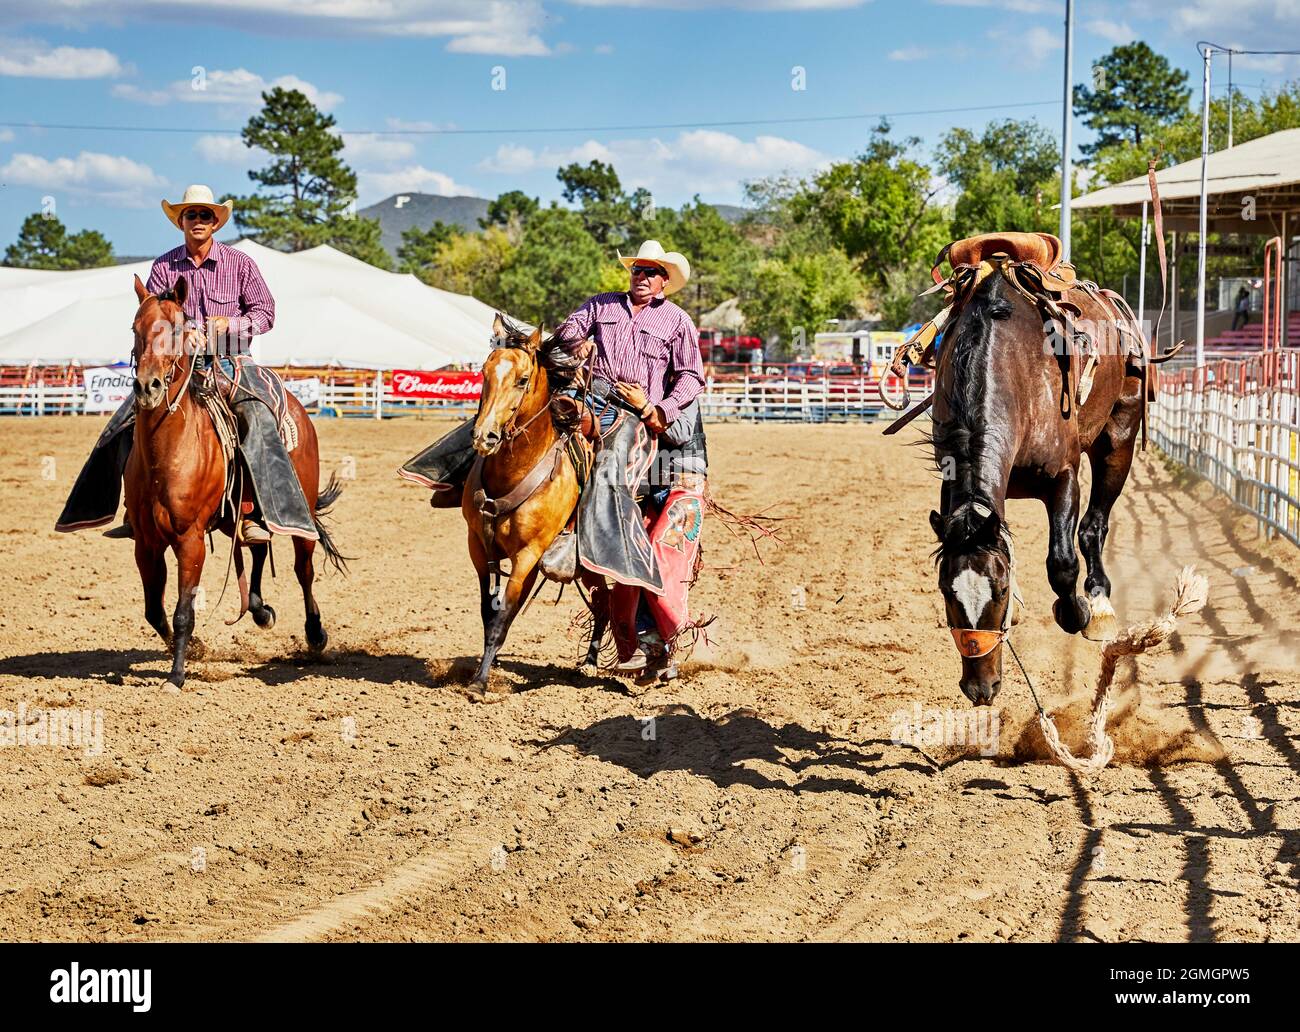 Prescott, Arizona, USA - September 12, 2021: Cowboy jumping off a bucking horse onto the handler's horse at the rodeo competition held at the Prescott Stock Photo